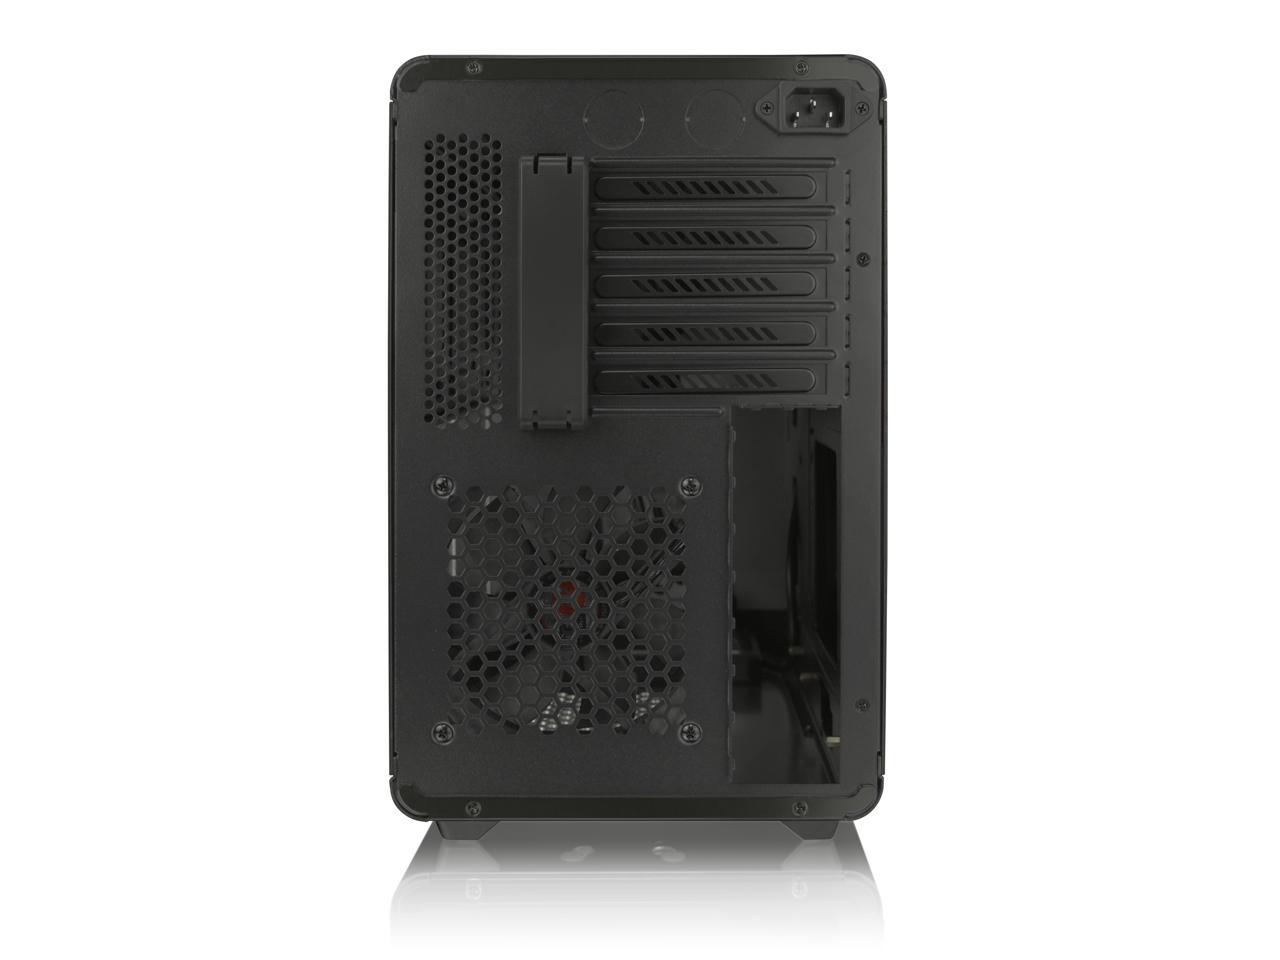 RAIJINTEK STYX BLACK, Alu Micro-ATX Case - Compatible With Regular ATX Power Supply, Max. 280mm VGA Card, 180mm CPU Cooler, Max. 240mm Radiator Cooling On Top, with A Drive Bay For Slim DVD On Side